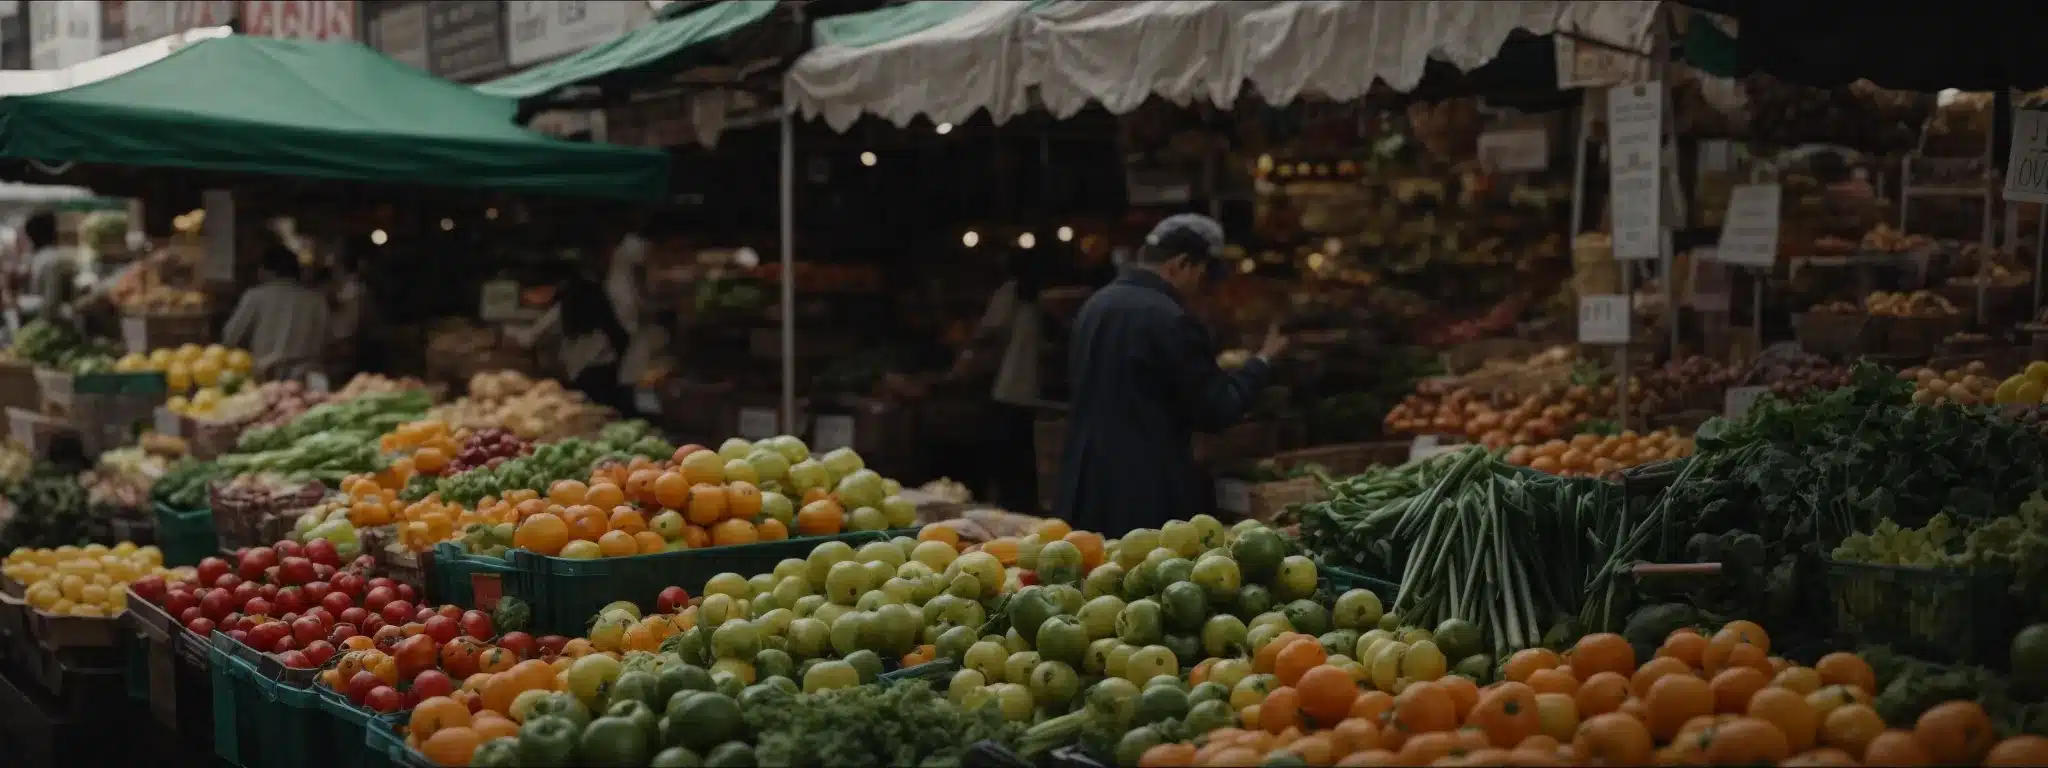 A Market Stall In New York With A Focused Vendor Surrounded By Fresh Produce, Symbolizing Tailored Local Seo Strategies.